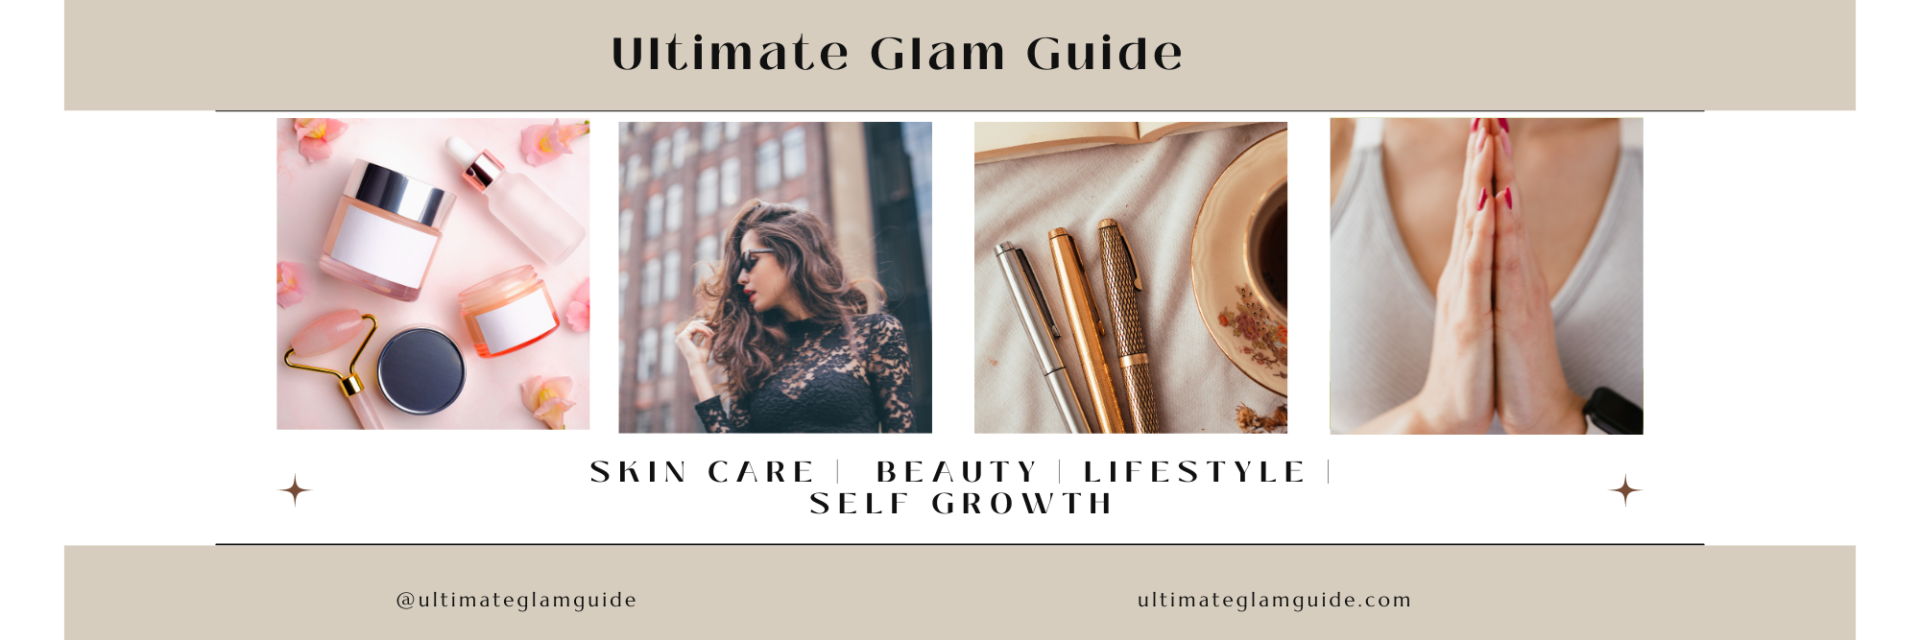 Ultimate Glam Guide